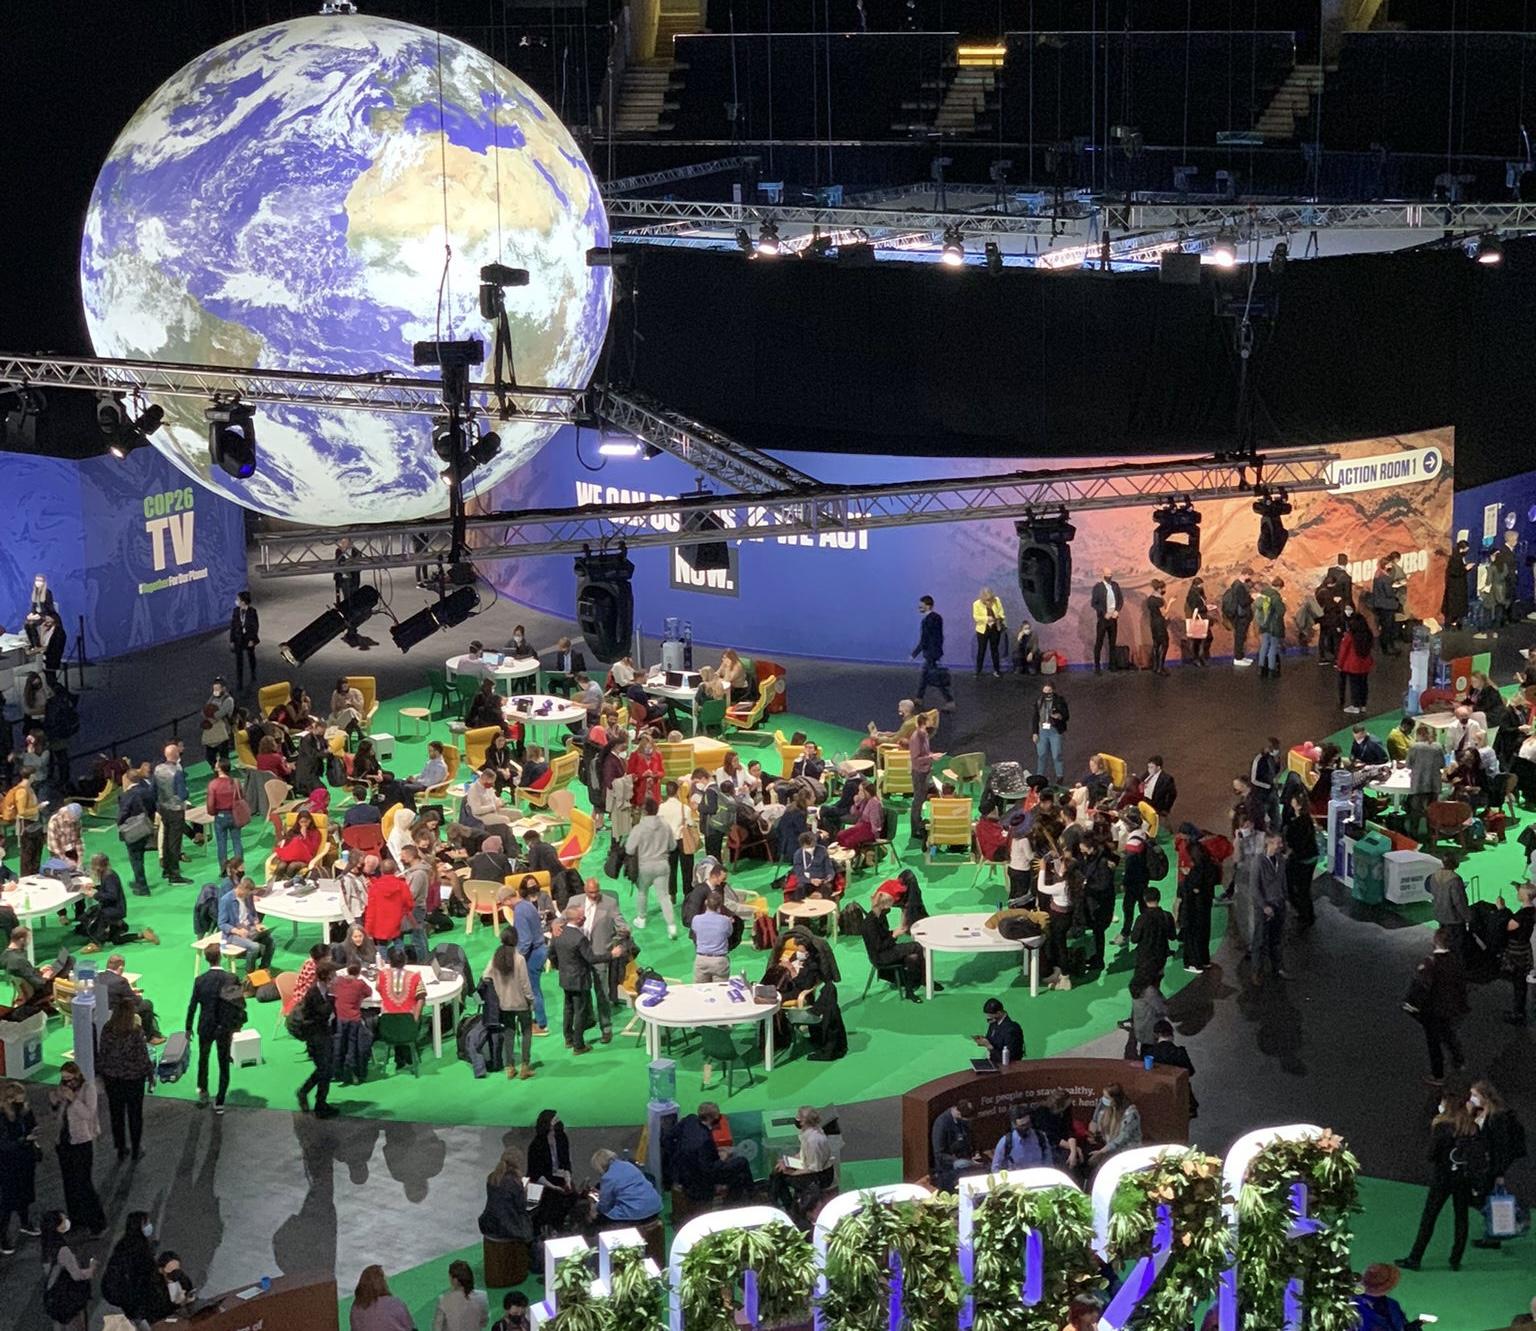 Overview of COP26 Action A area from above